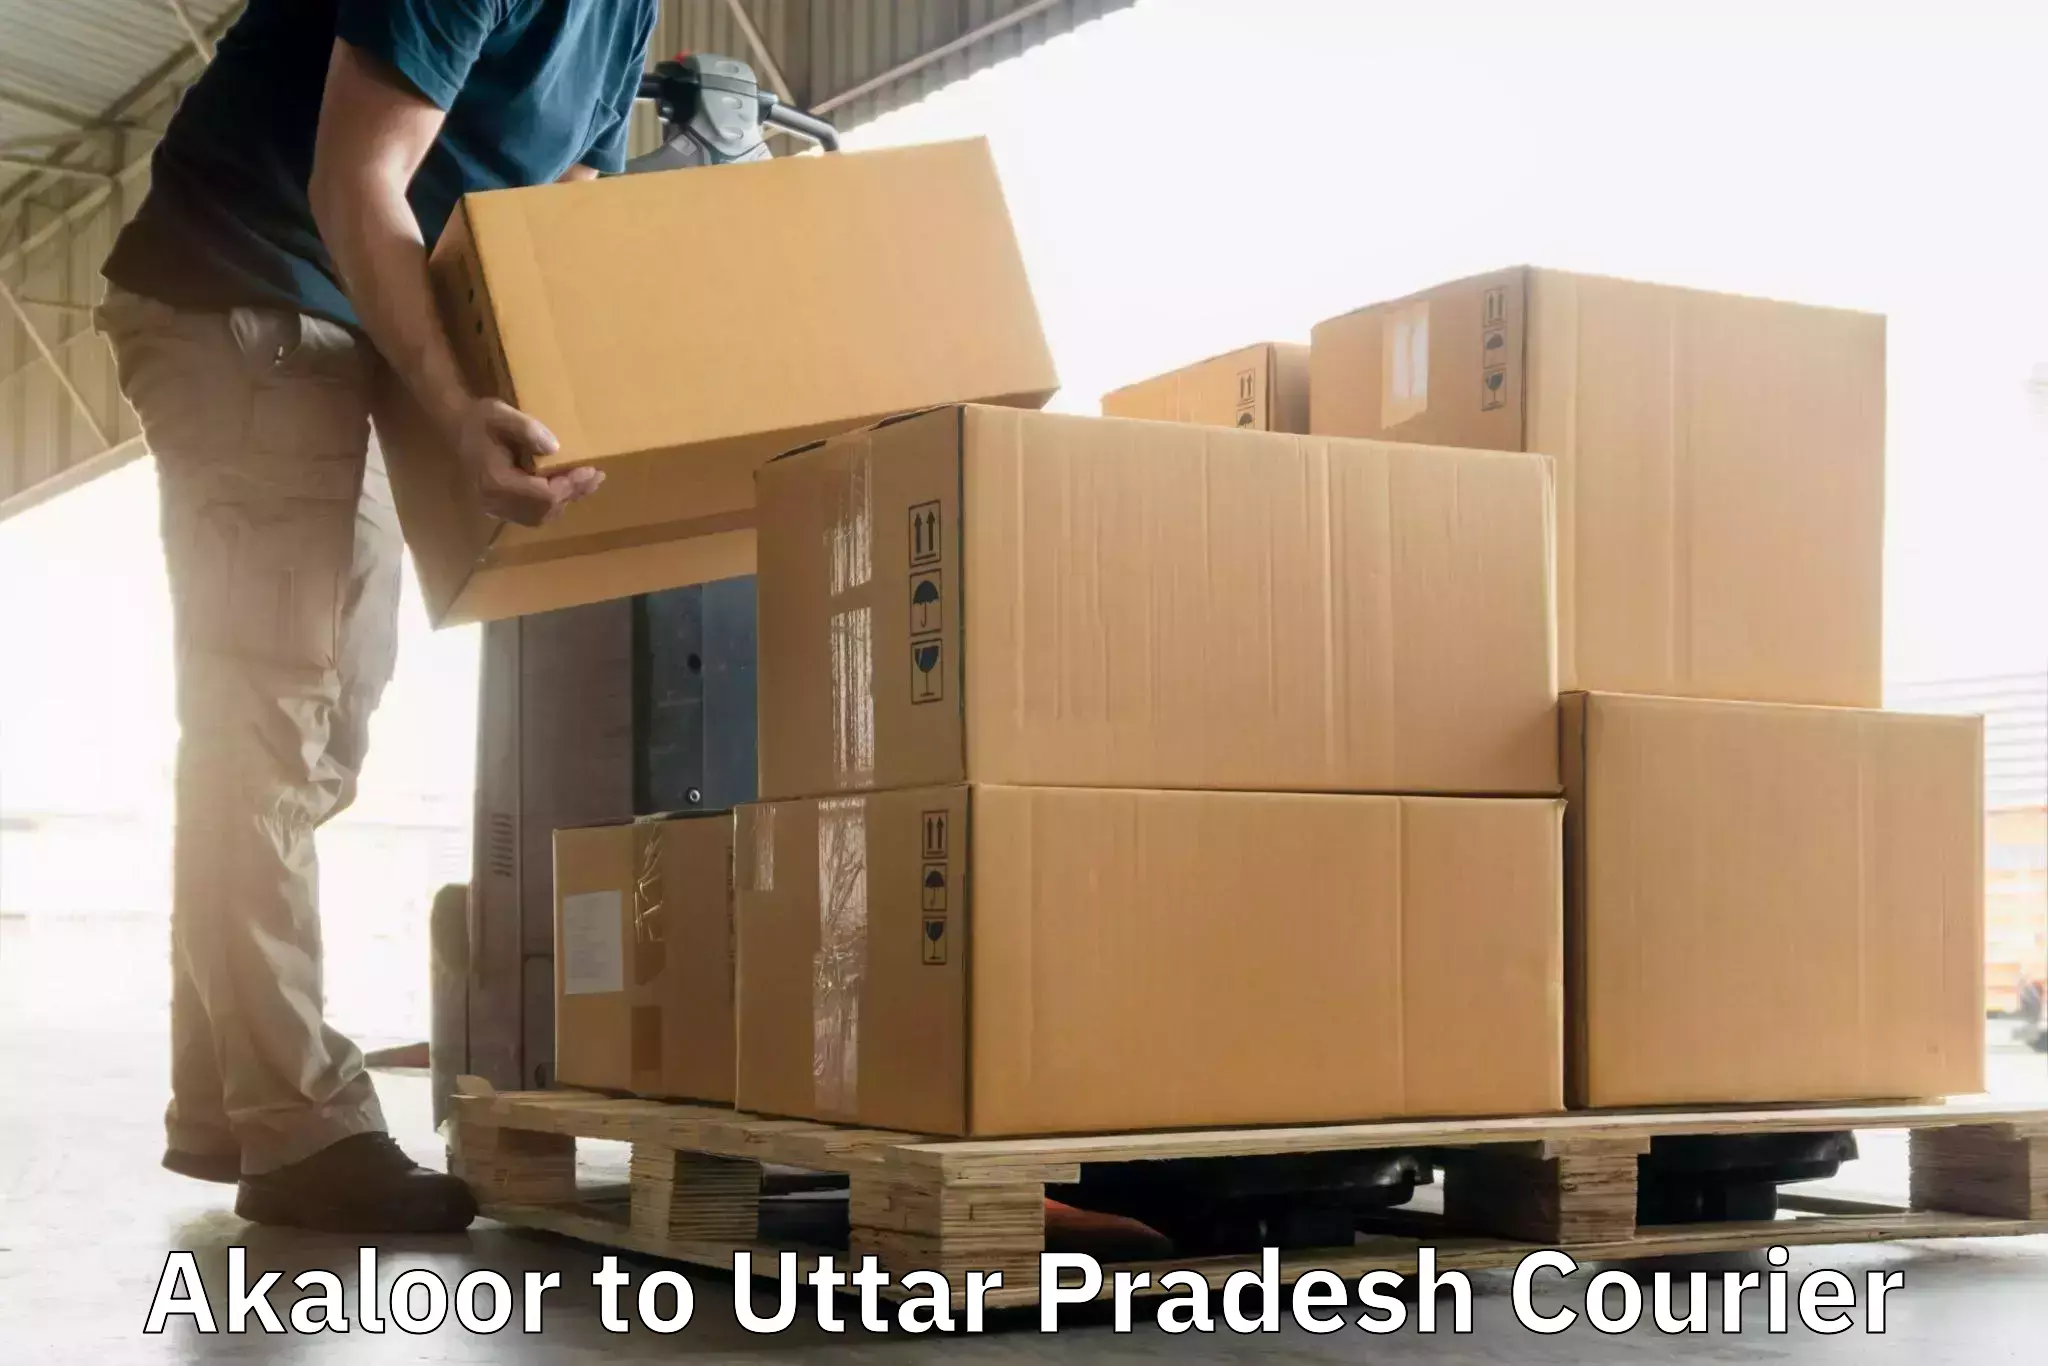 Parcel service for businesses in Akaloor to Ayodhya